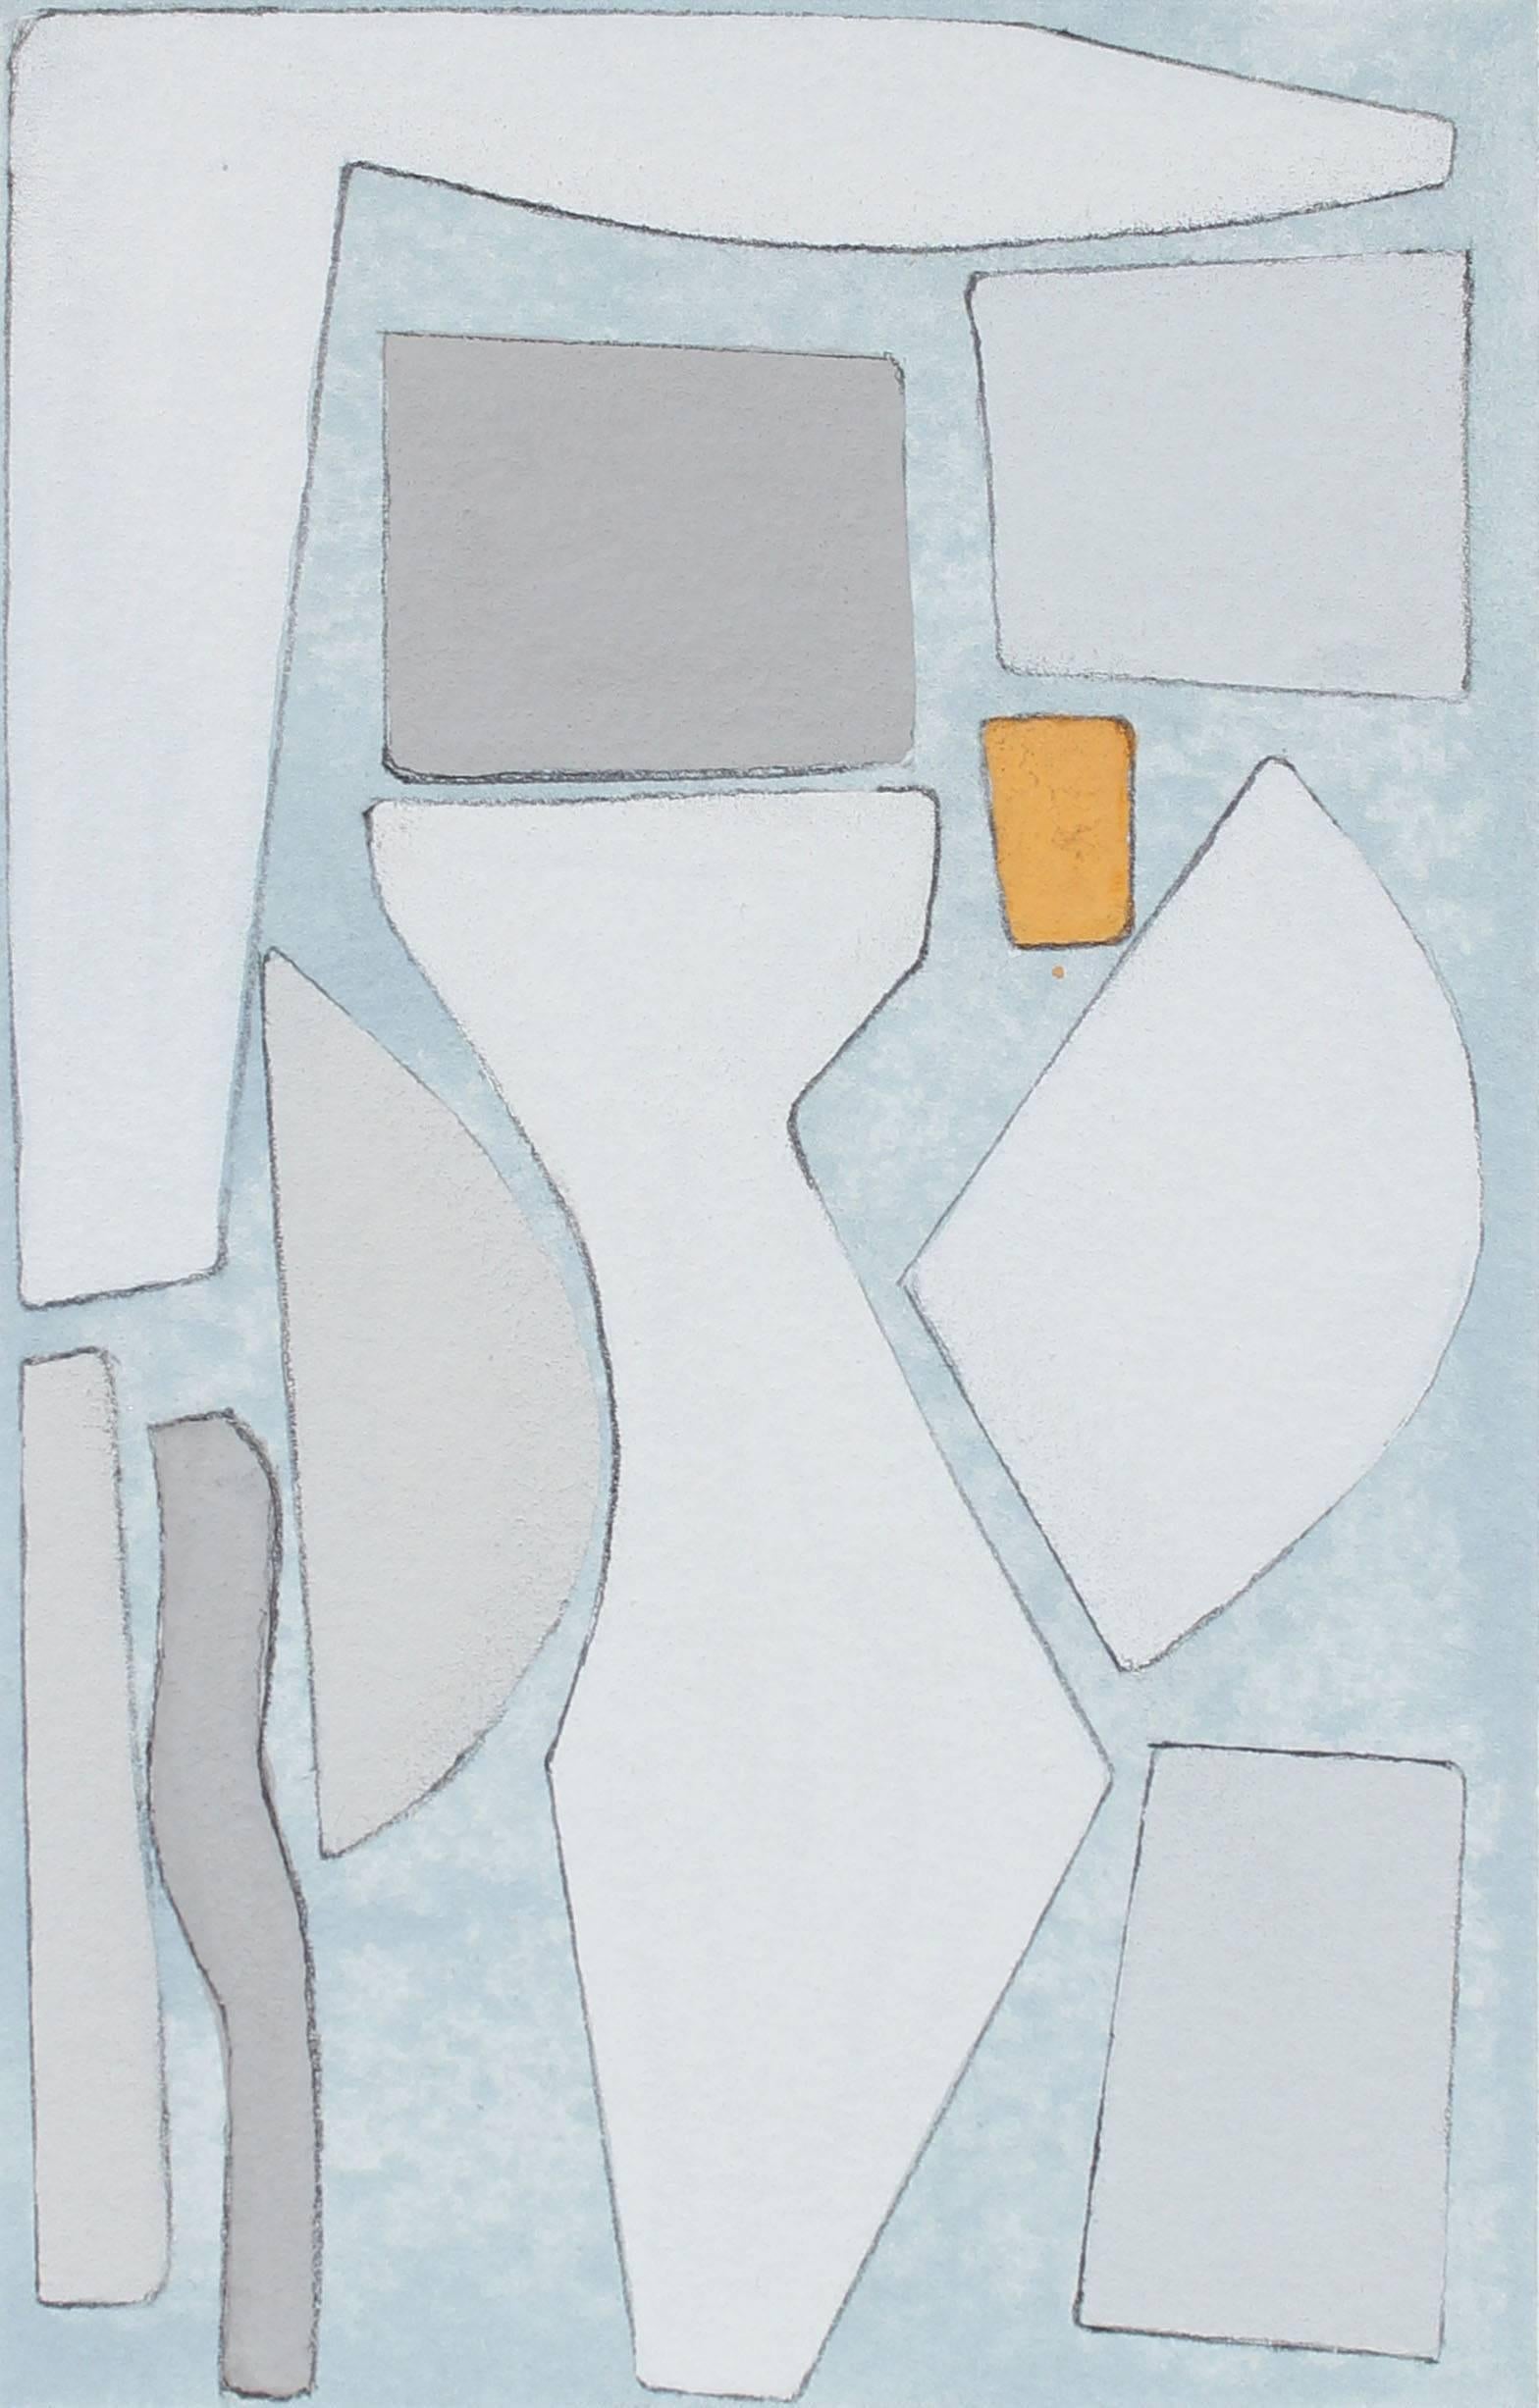 Rob Delamater Abstract Drawing - "Window of Orquevaux VI" Abstract Gouache in Pale Blue, 2017